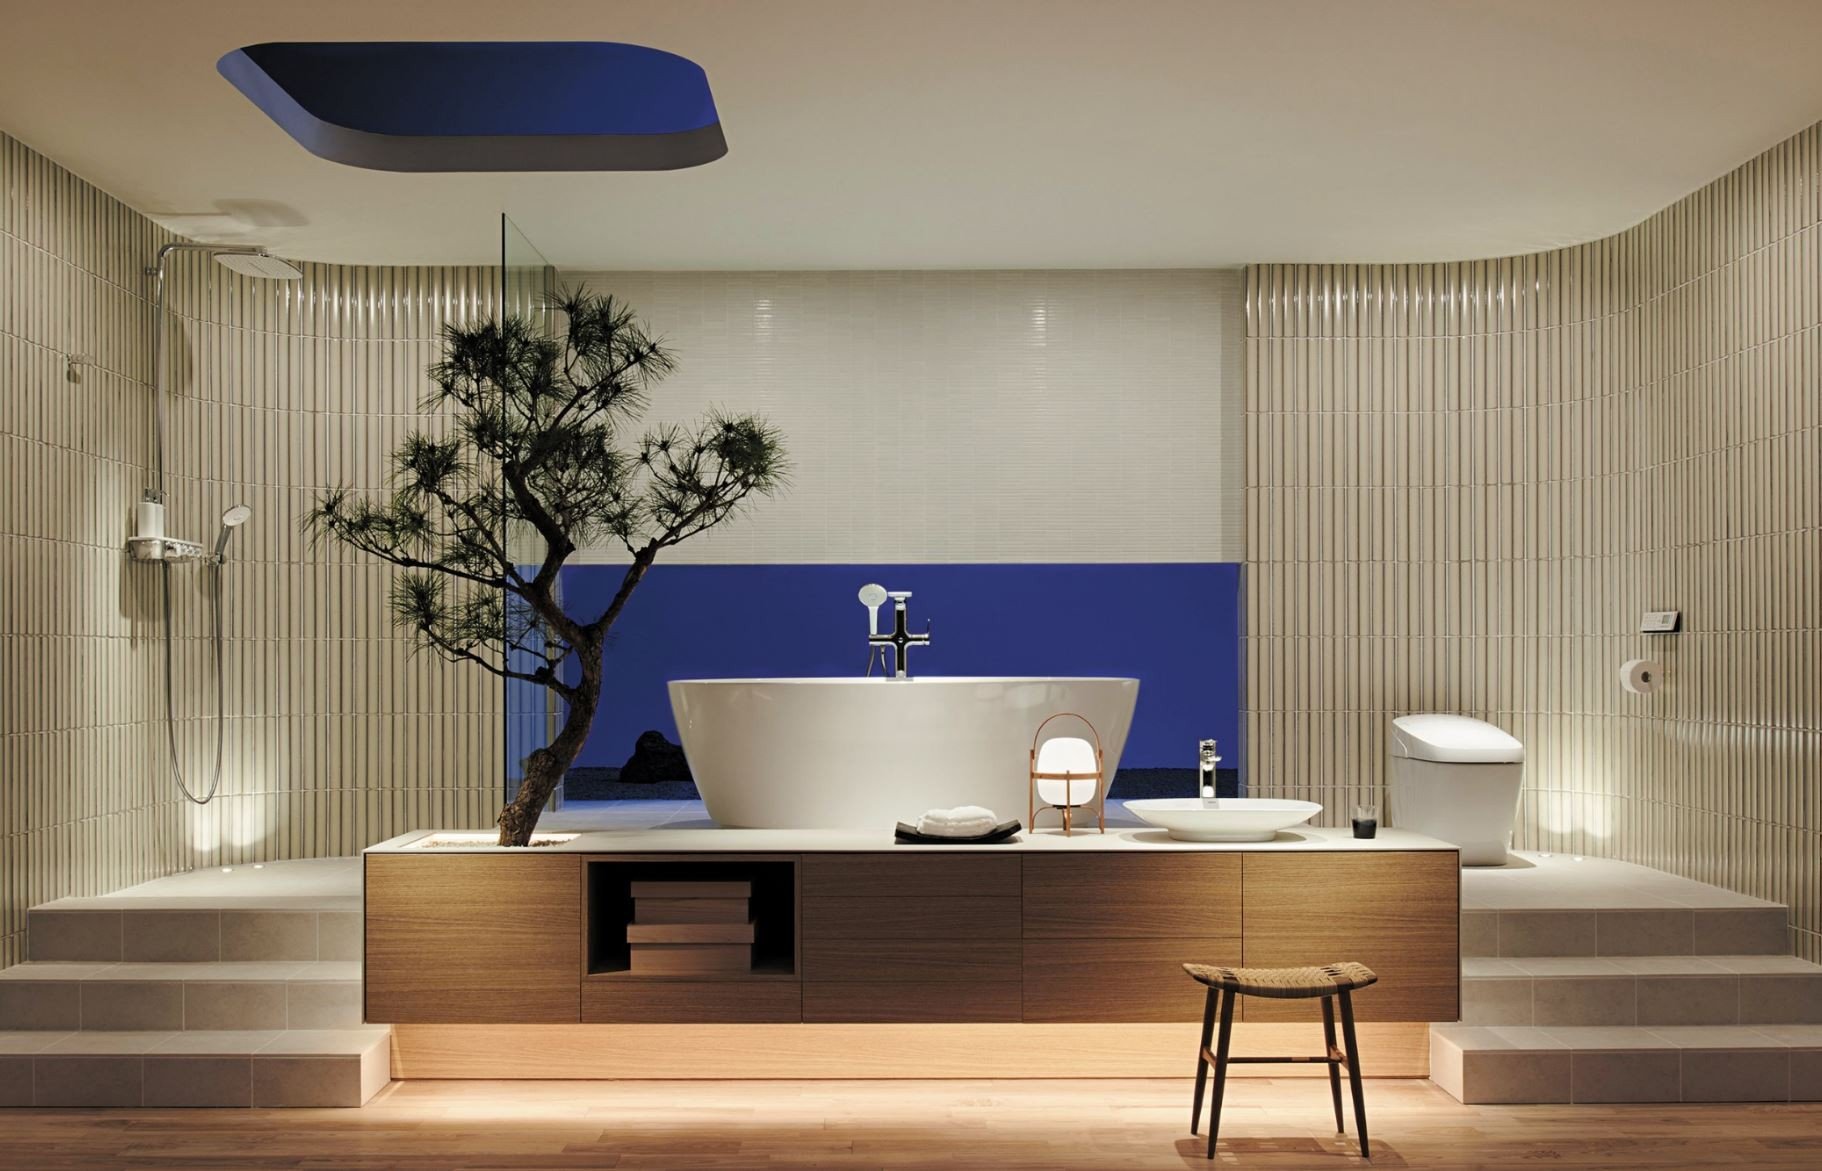 INAX’s Japanese-style bathroom contains a bathtub which remains popular with many people who enjoy soaking in the hot water for a long time. Photos: Handouts